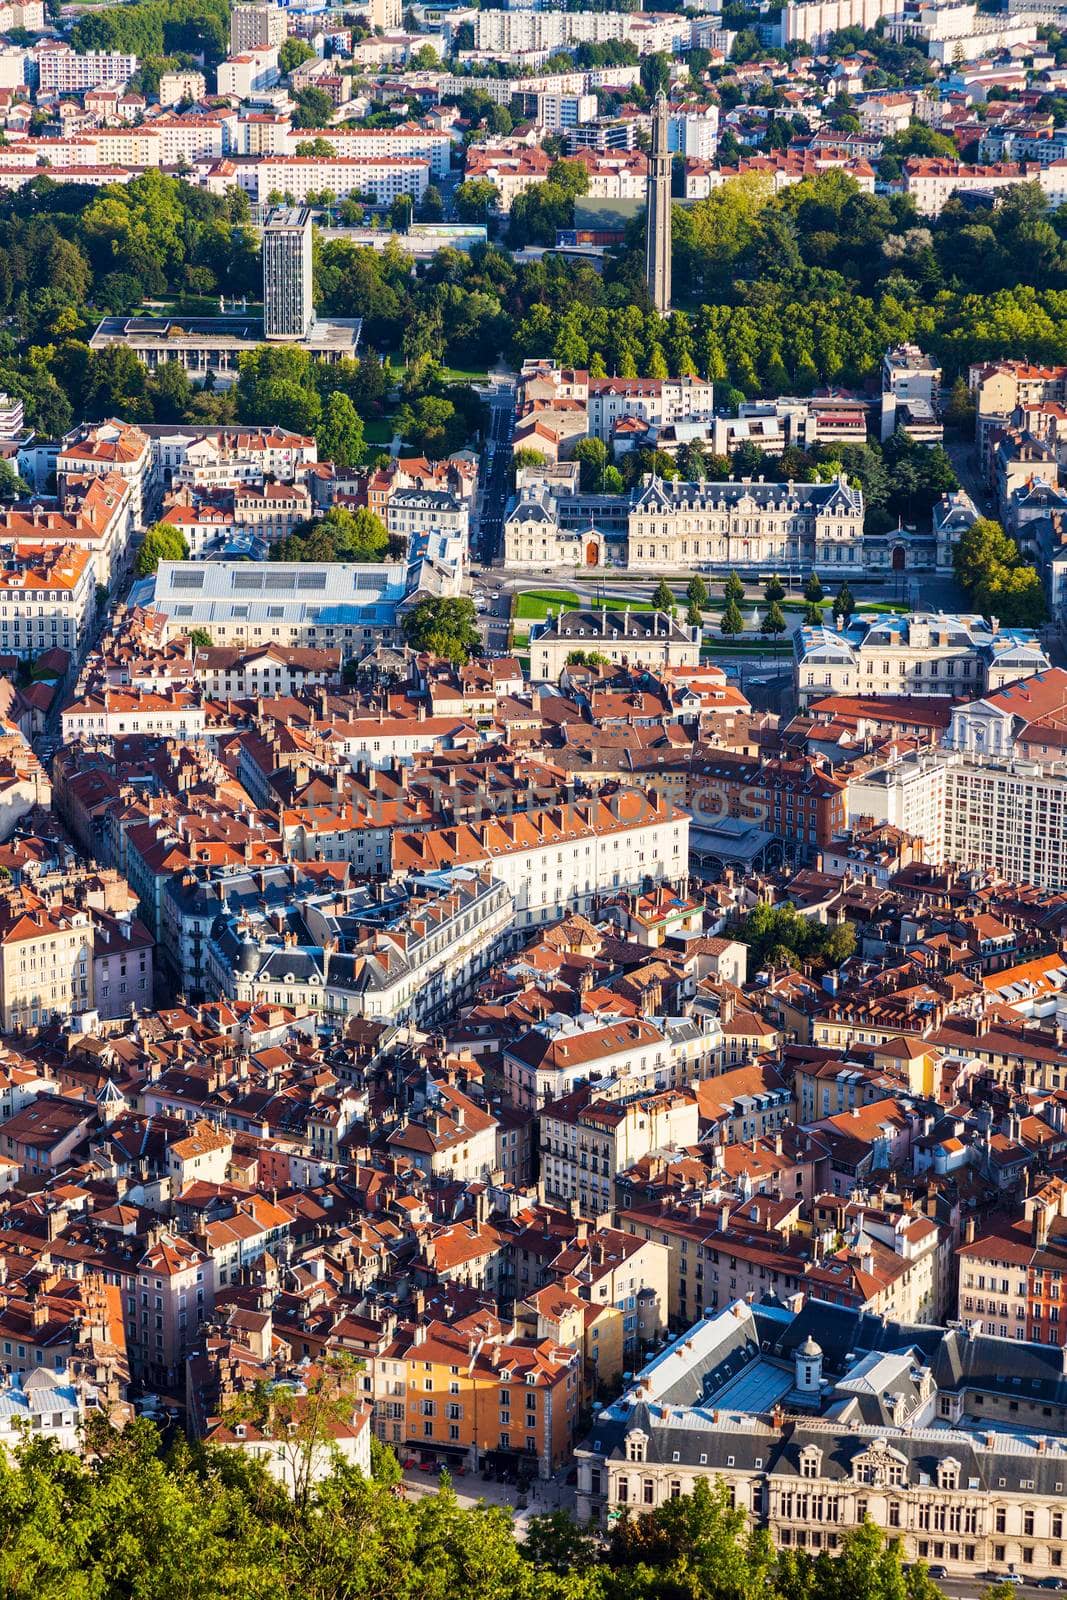 Grenoble architecture - aerial view. Grenoble, Auvergne-Rhone-Alpes, France.